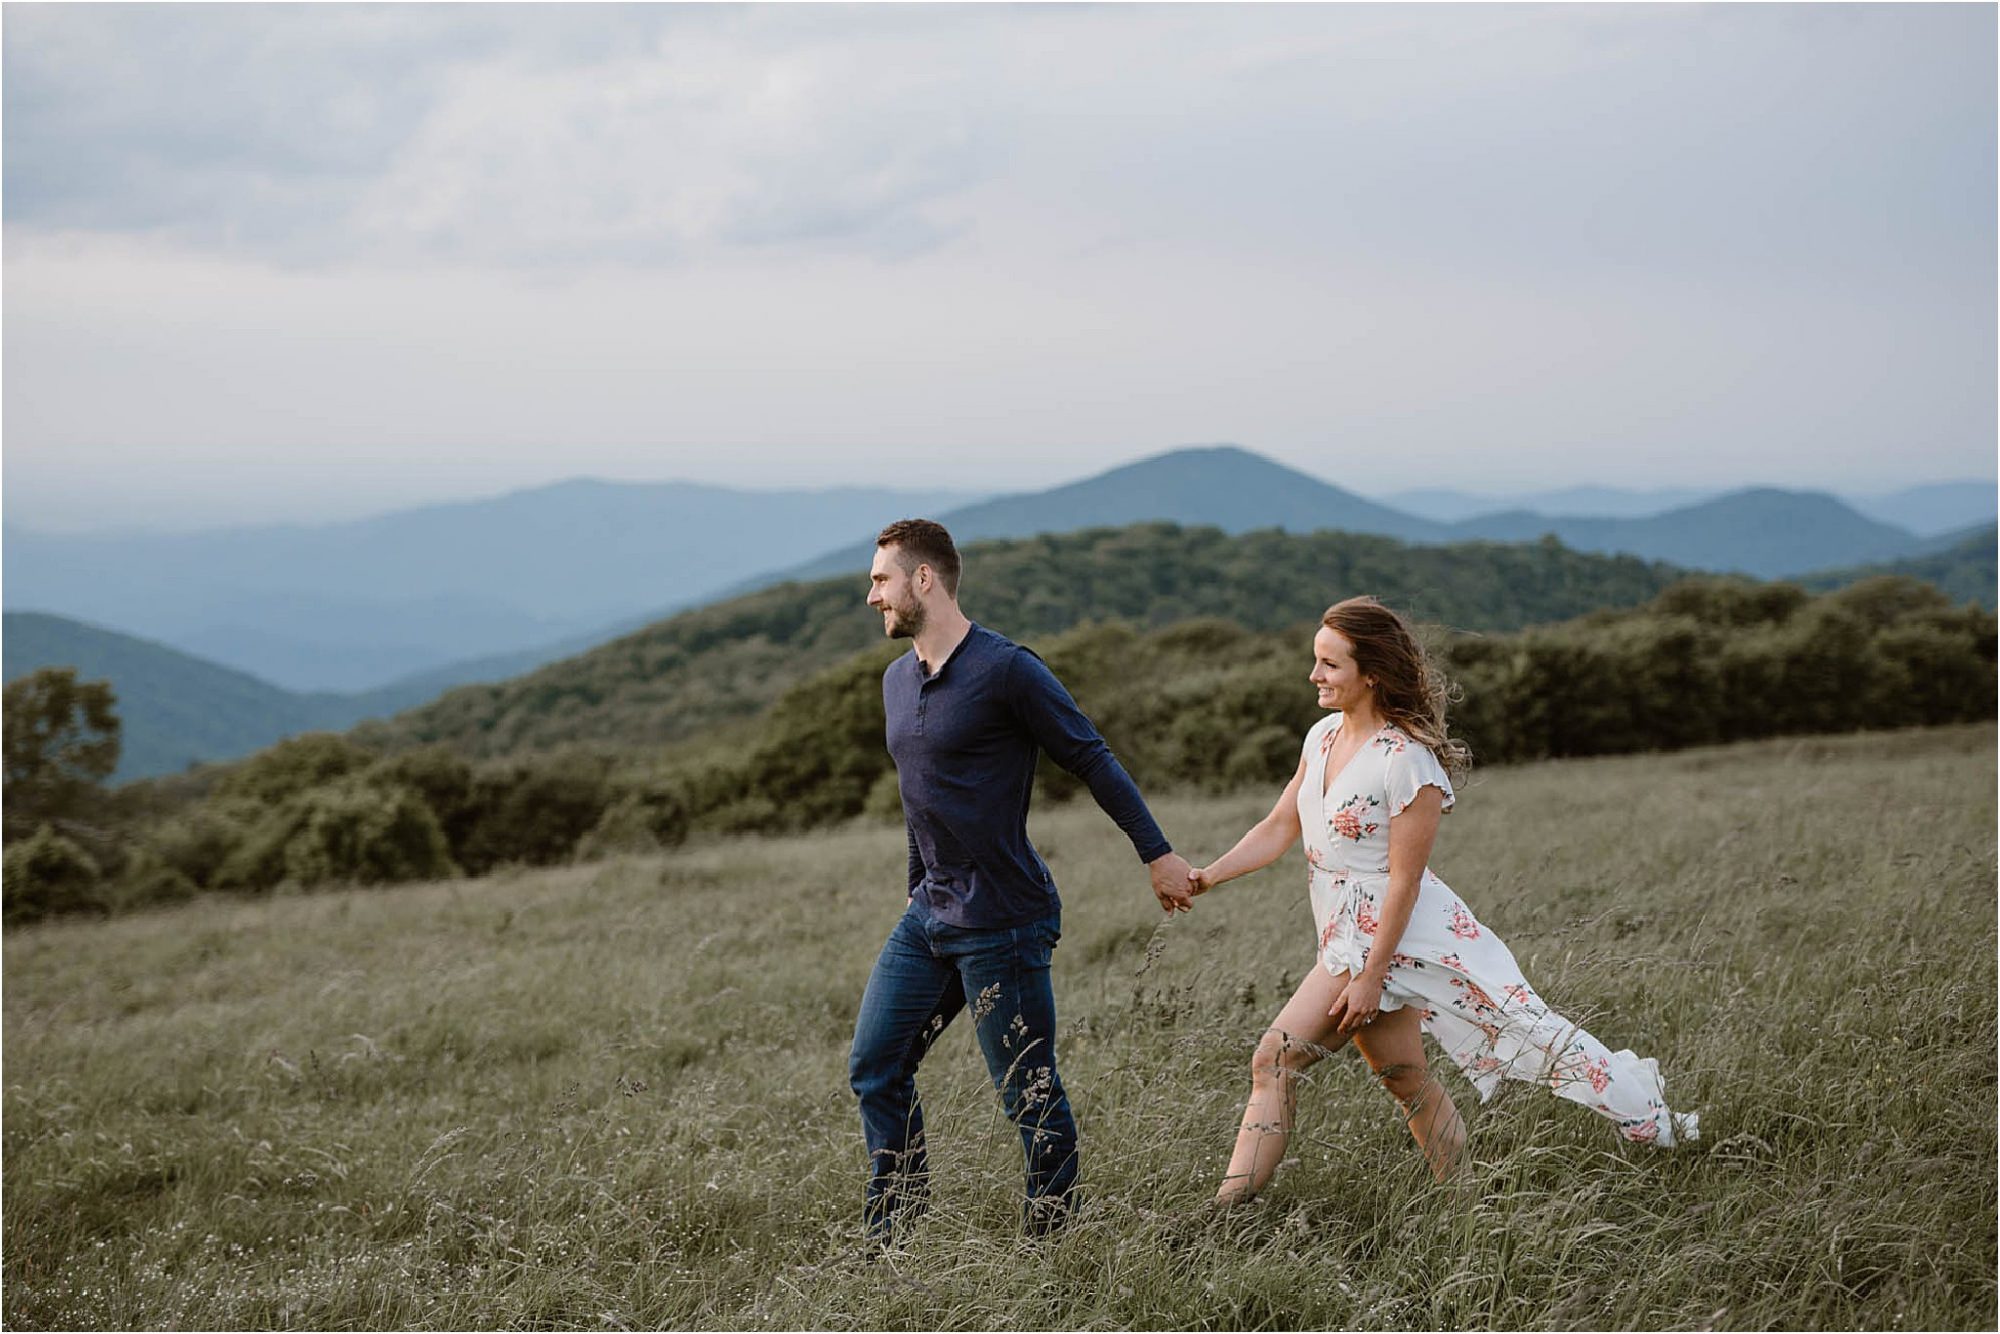 man and woman walking in field on mountain top